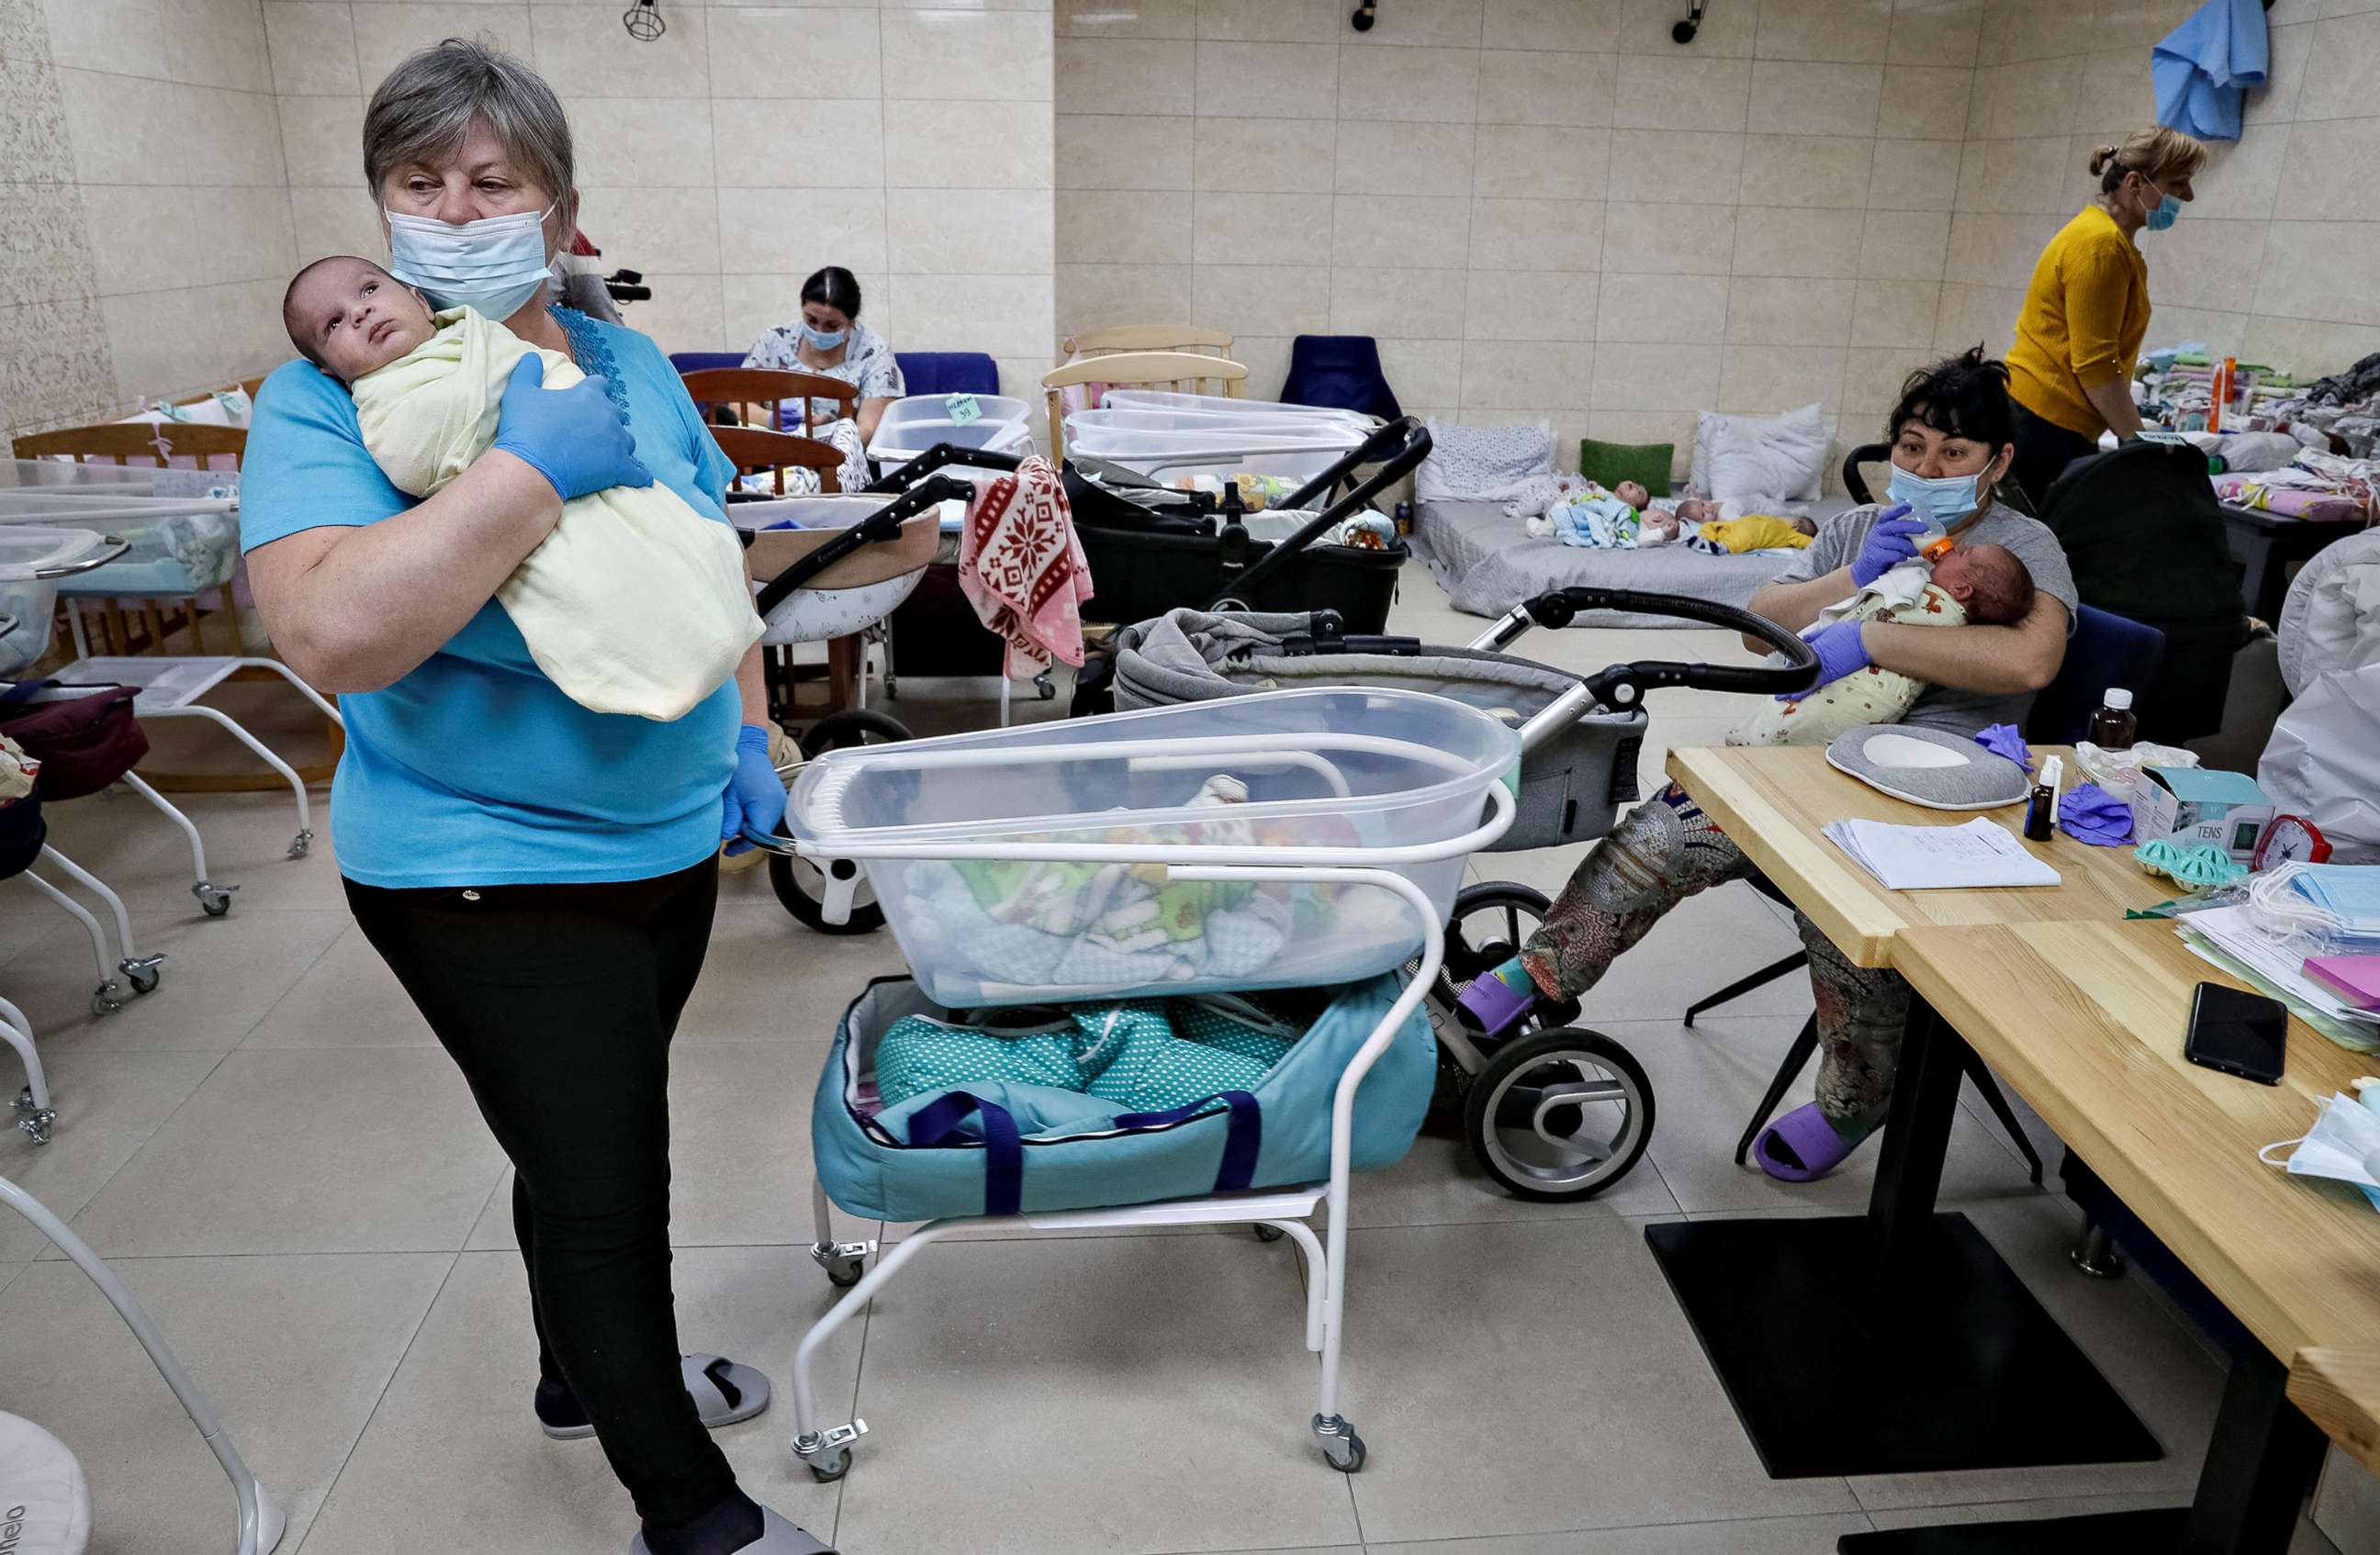 PHOTO: Nurses look after surrogate-born babies inside a BioTexCom clinic shelter in a basement on the outskirts of Kyiv, Ukraine, March 15, 2022.